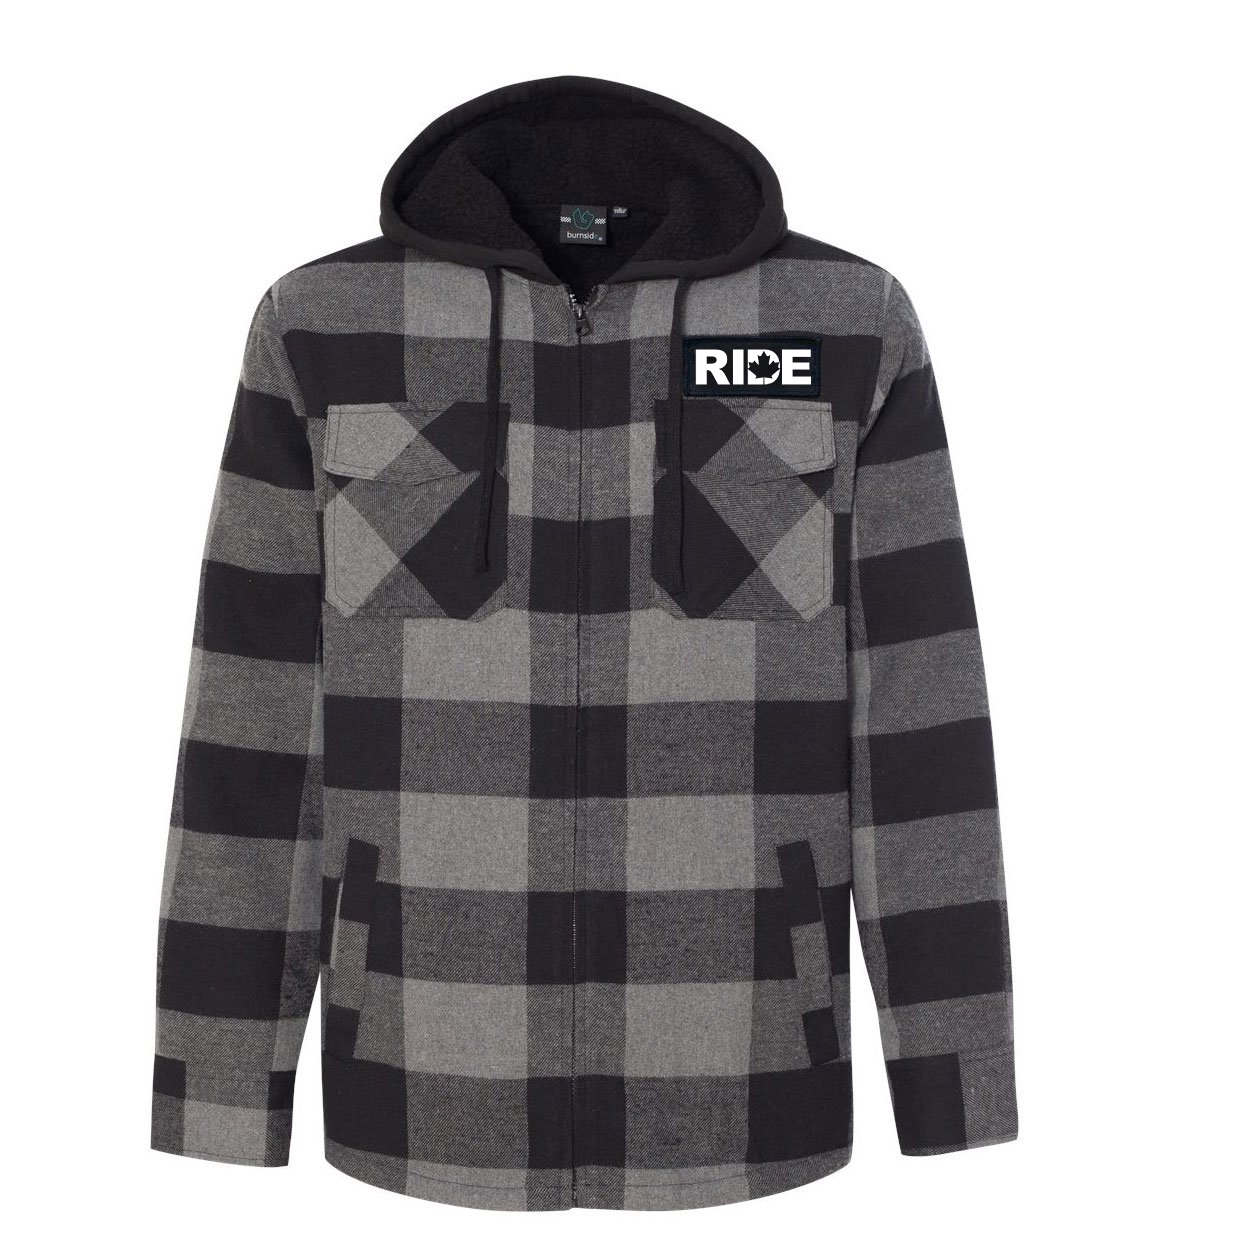 Ride Canada Classic Unisex Full Zip Woven Patch Hooded Flannel Jacket Black/Gray (White Logo)